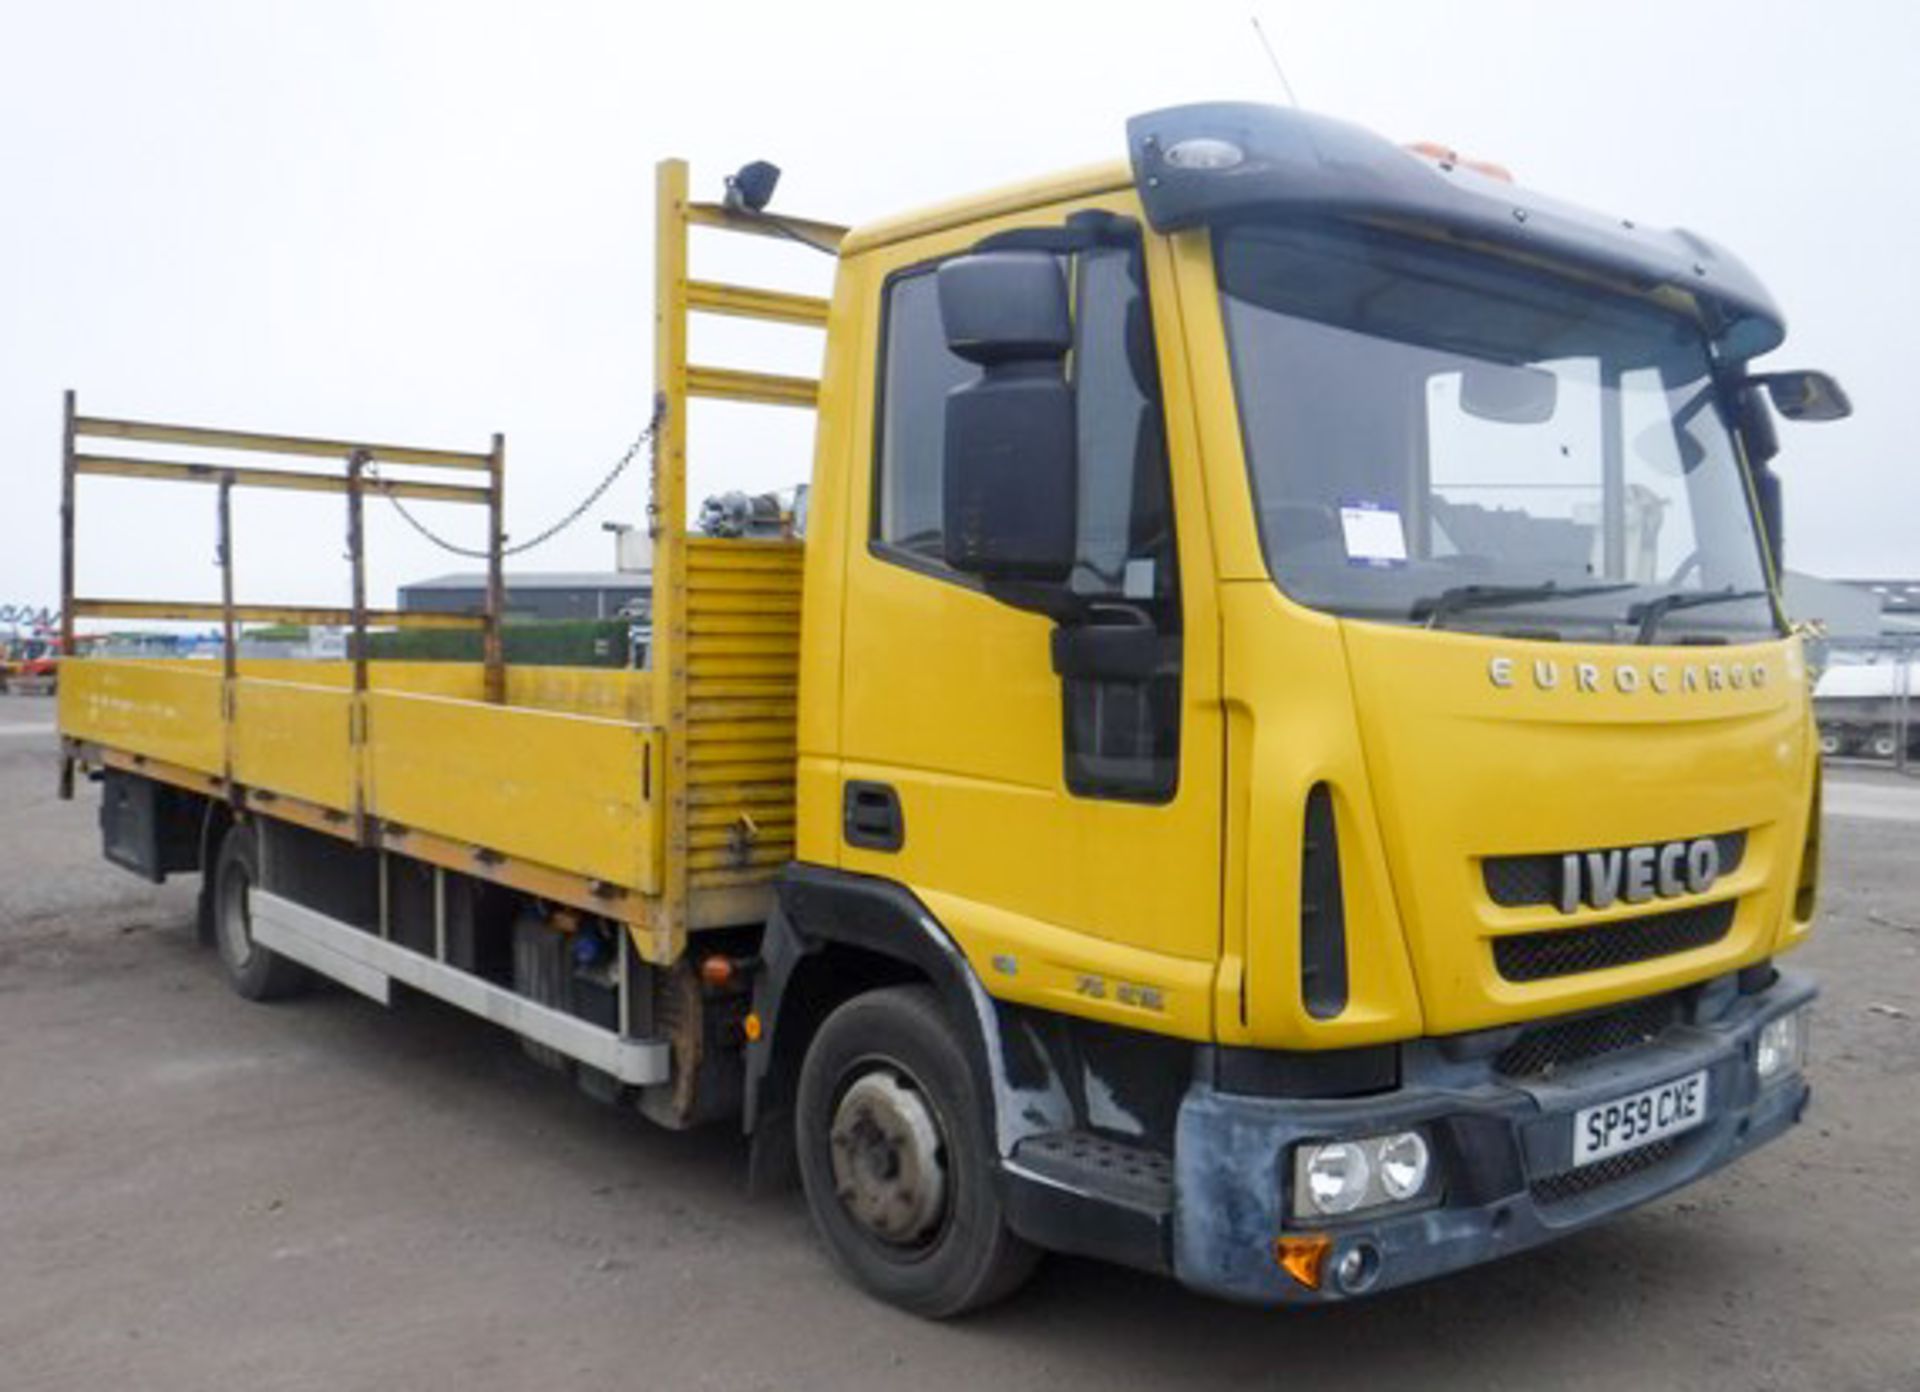 IVECO MODEL EUROCARGO (MY 2008) - 3920cc - Image 11 of 17